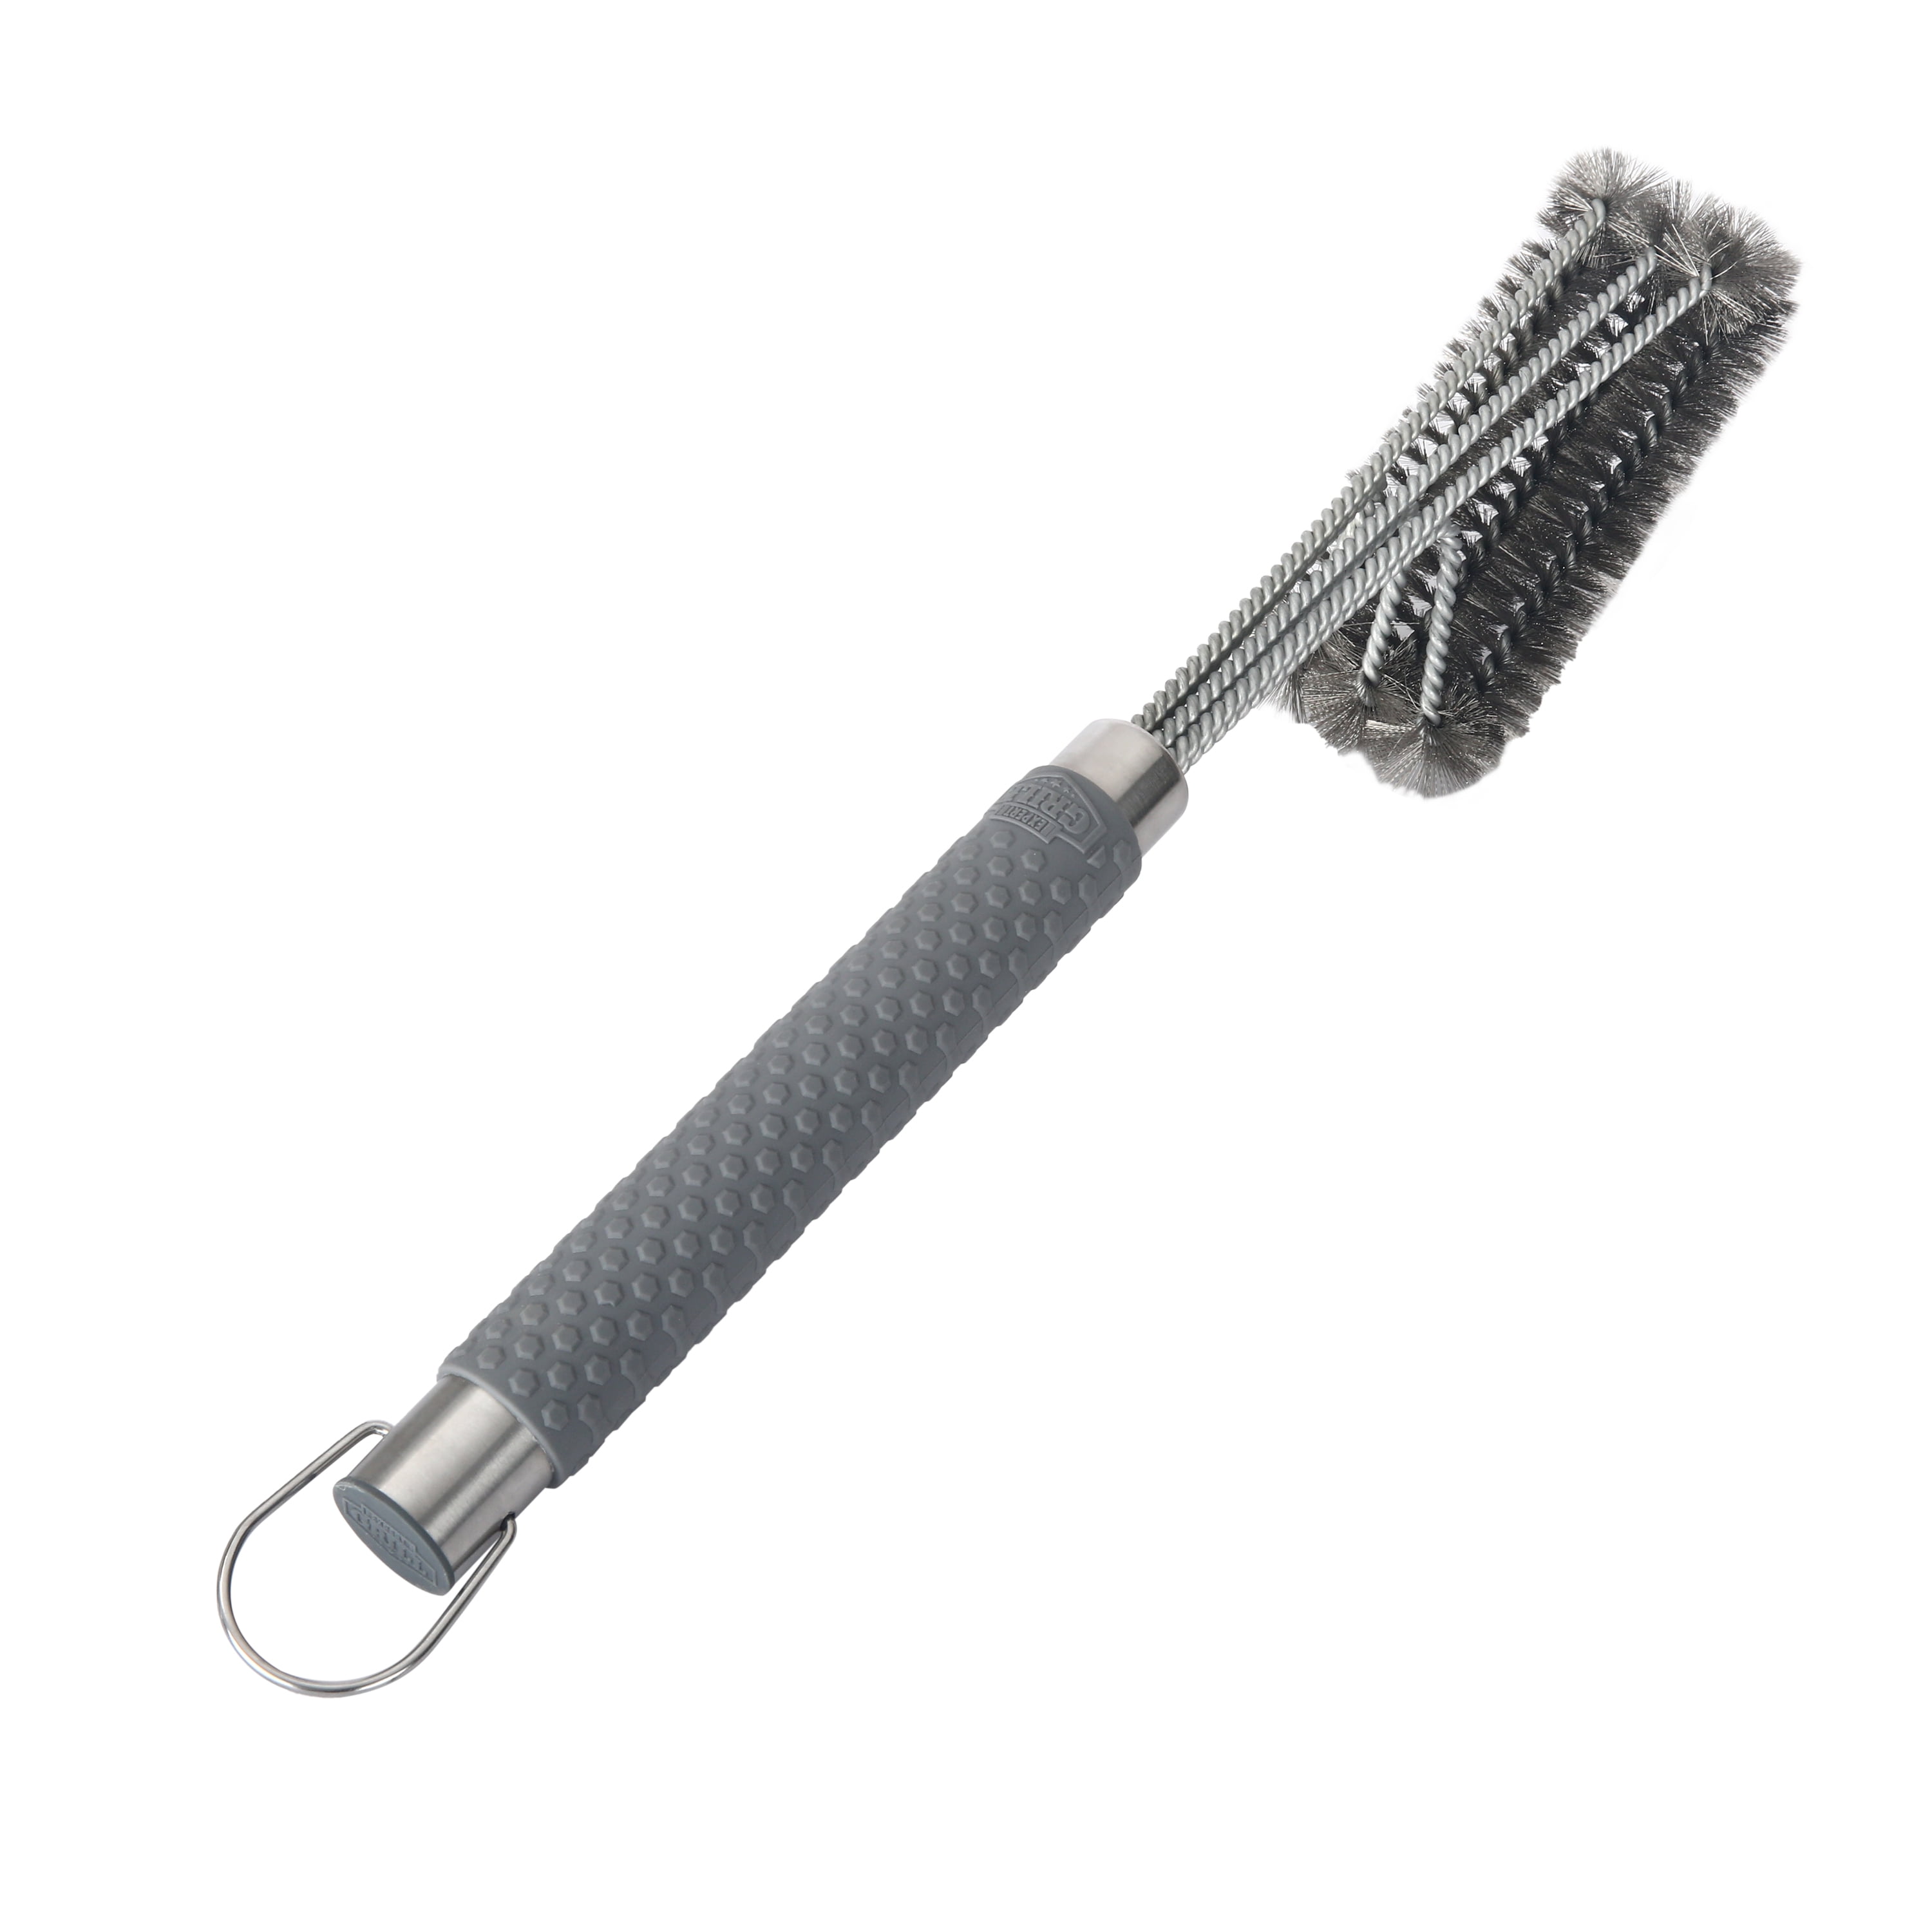 GRILLHOGS Grill Scaper, 18 Grill Cleaning Brush, Stainless Steel,  Removable Handle for Cleaning & Reviews